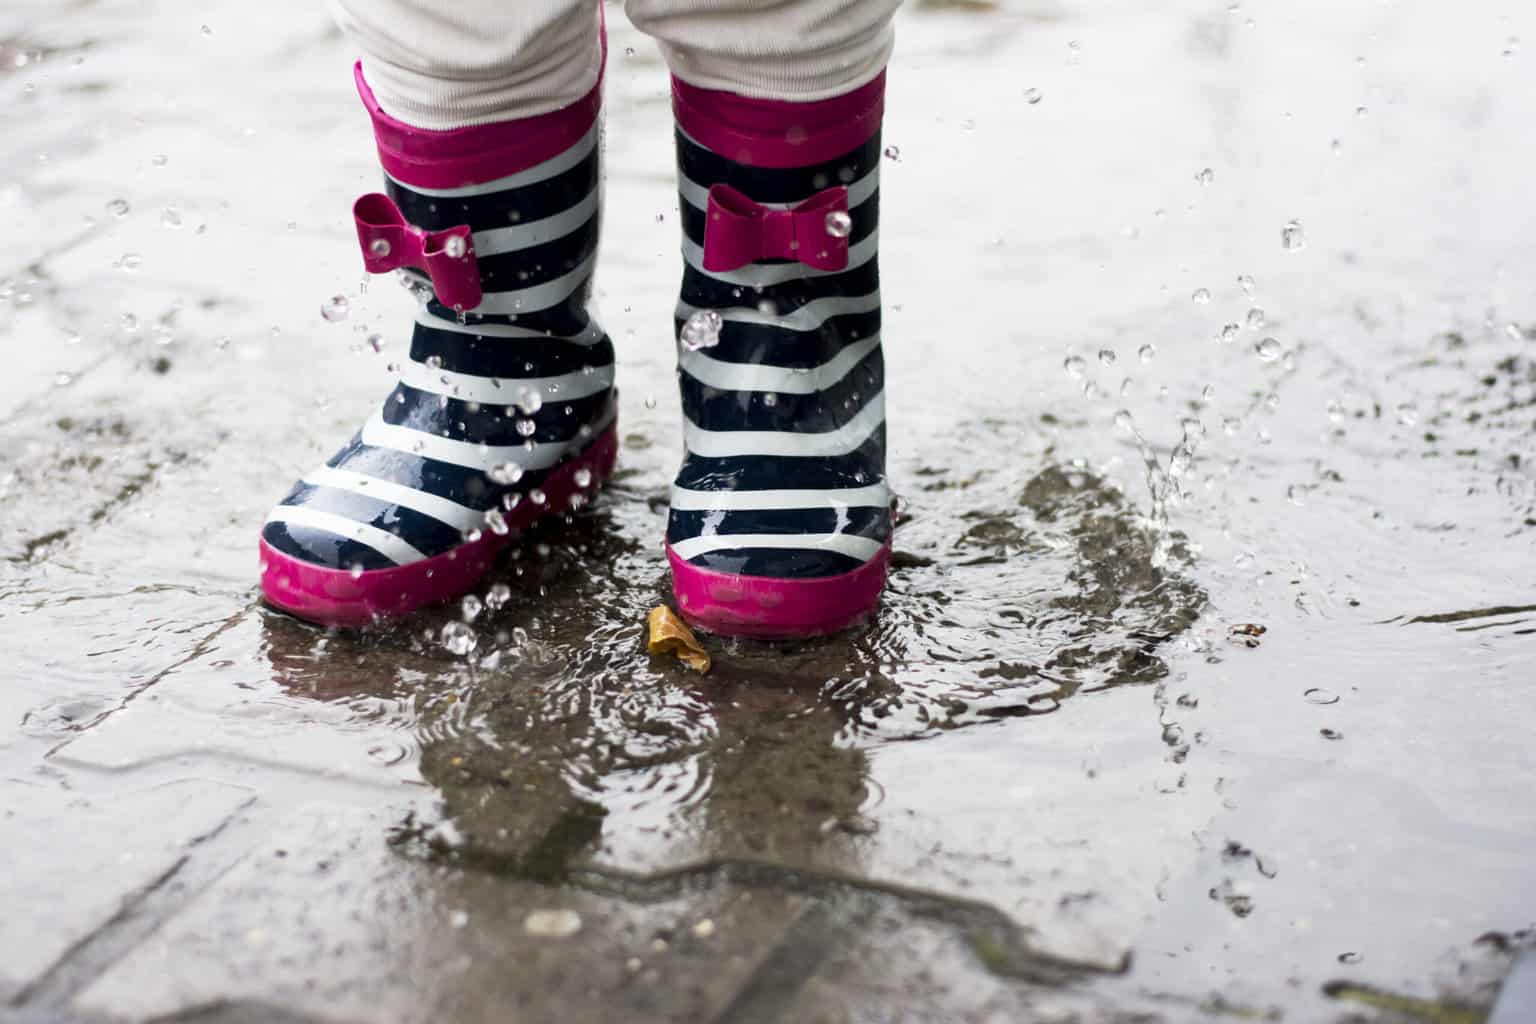 rainy day activities for toddlers and preschoolers